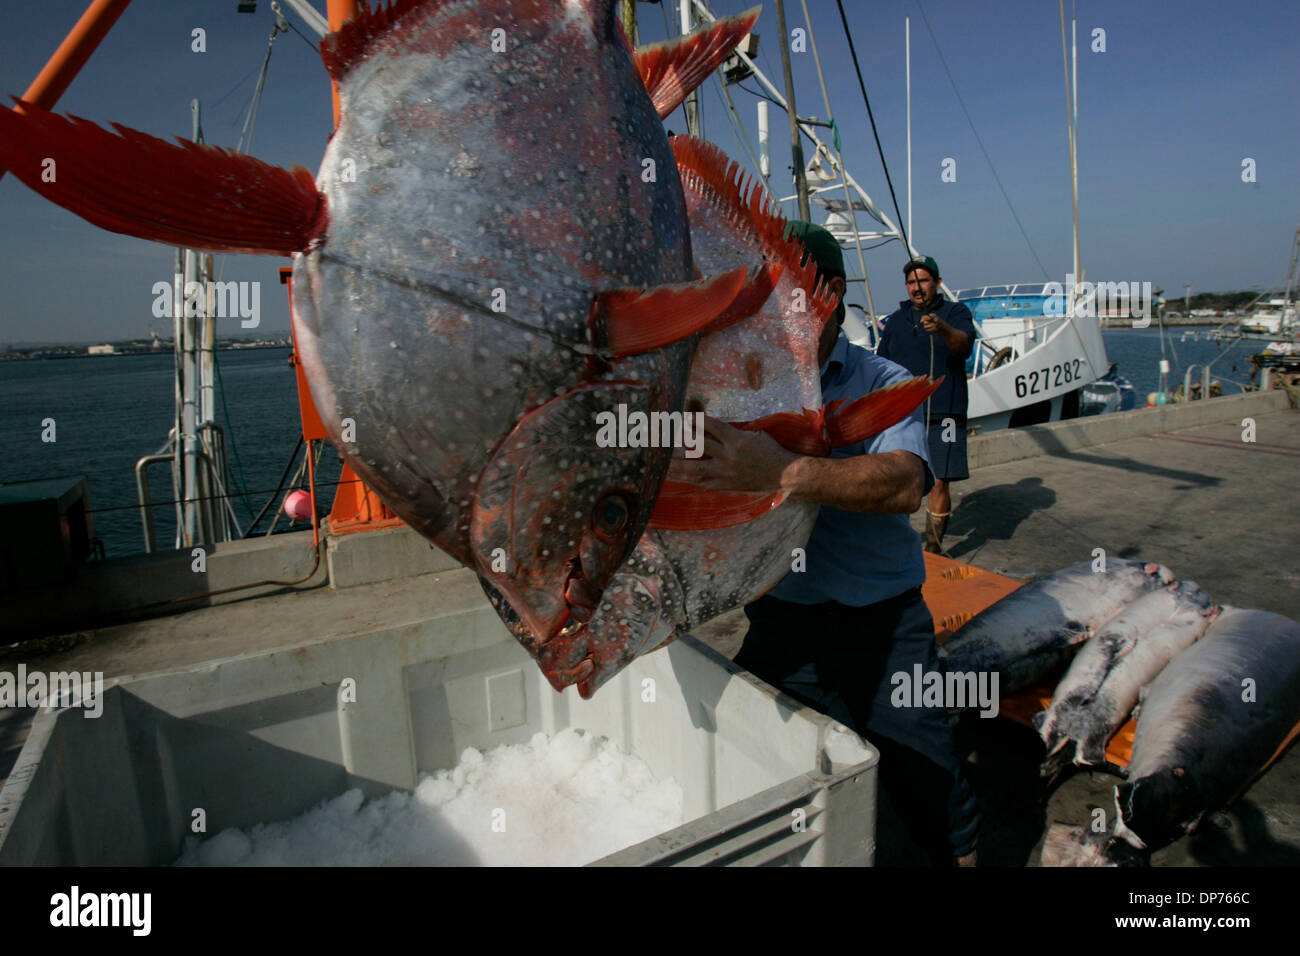 Nov 01, 2006; San Diego, CA, USA; ENRIQUE MEZA, rear, and CARLOS ACUNA (tilde over the N) unloaded locally caught Opah, a type of pelagic sunfish,  at the Chesapeake Fish Company at Seaport Village on Wednesday, November 1, 2006.  Mandatory Credit: Photo by John Gibbins/SDU-T/ZUMA Press. (©) Copyright 2006 by SDU-T Stock Photo